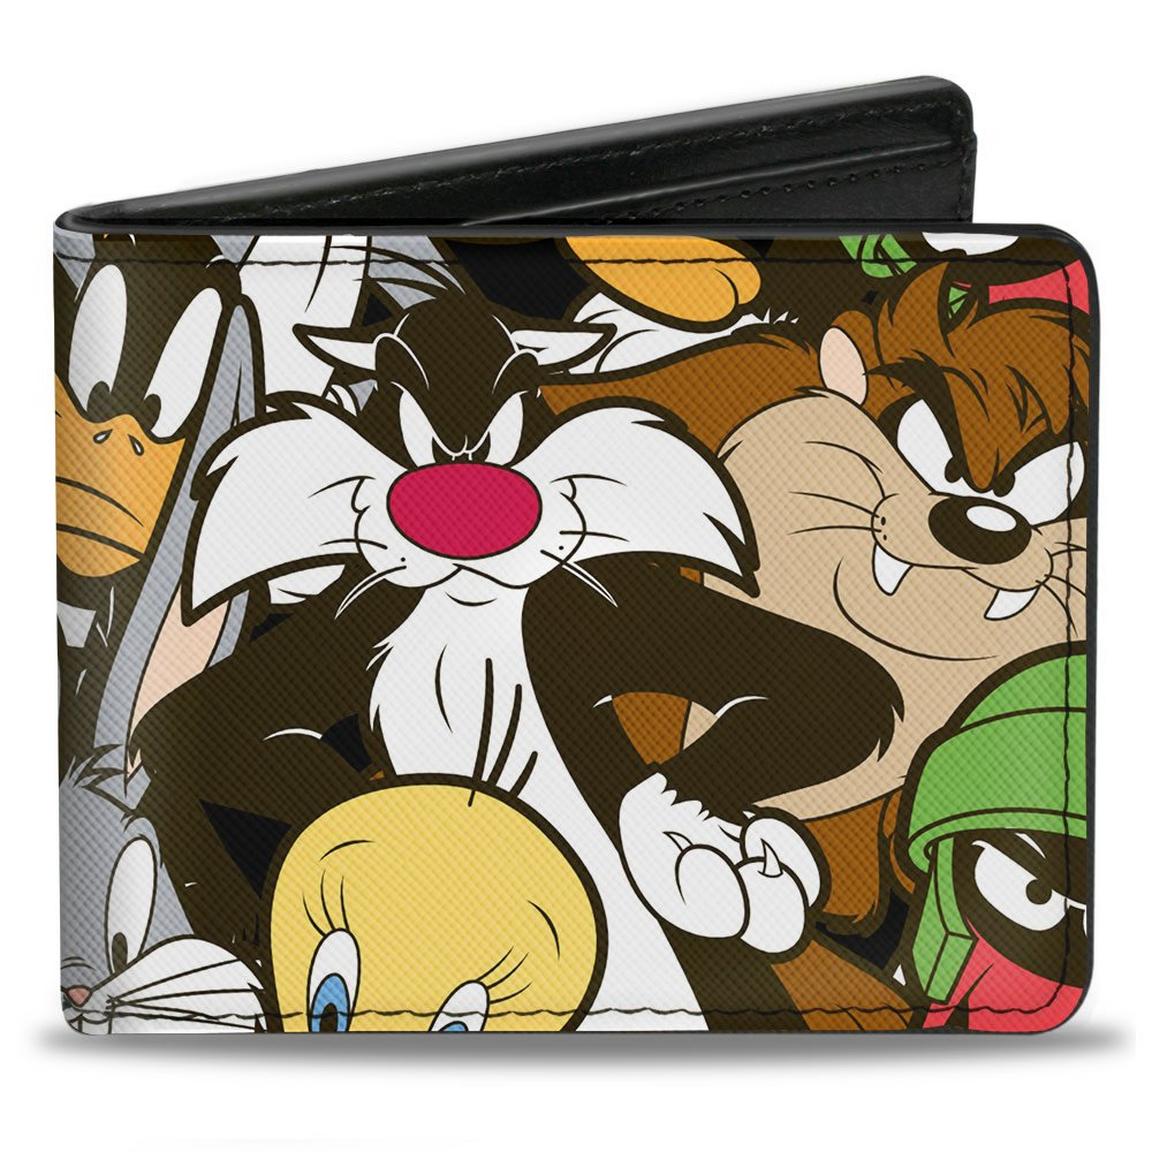 Buckle-Down Looney Tunes Polyurethane Bifold Wallet, Size: One Size, Buckle Down